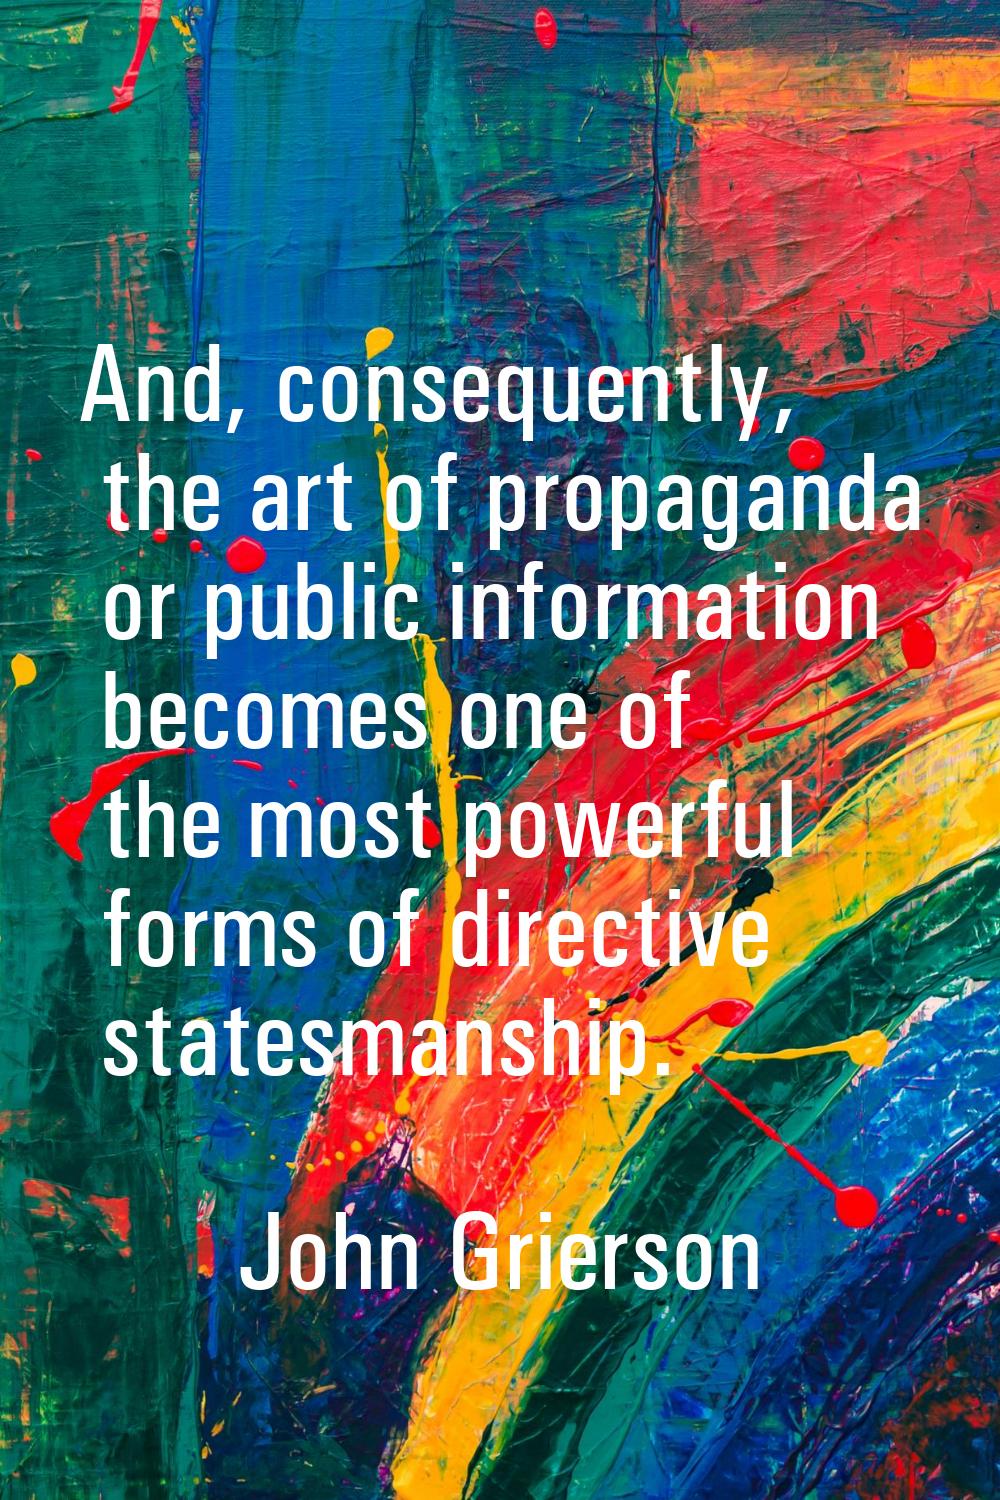 And, consequently, the art of propaganda or public information becomes one of the most powerful for